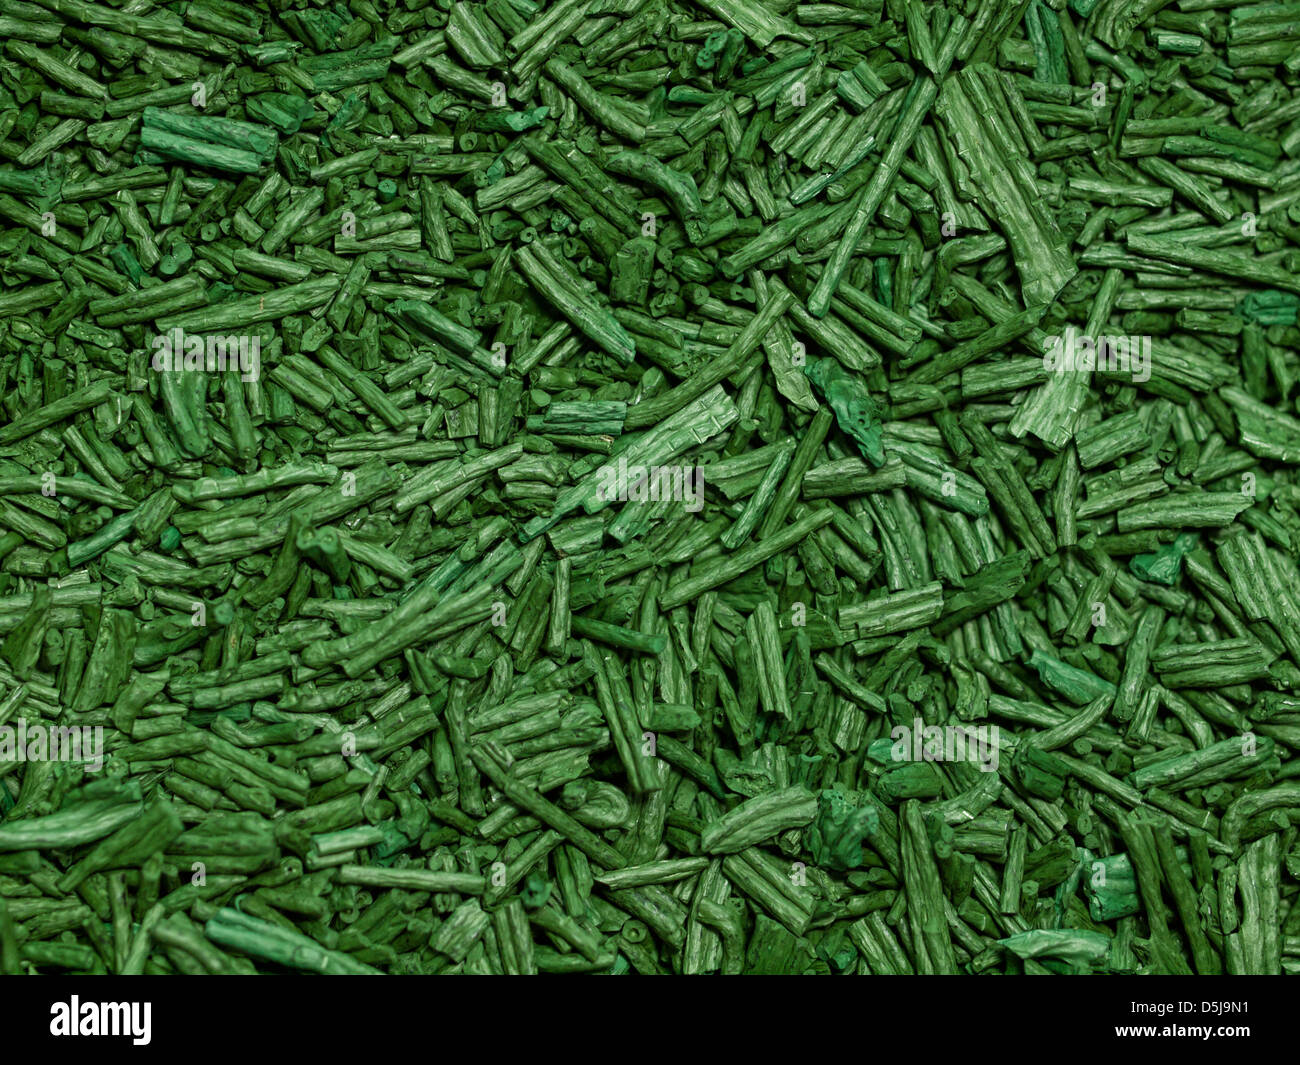 Spirulina High Resolution Stock Photography and Images - Alamy